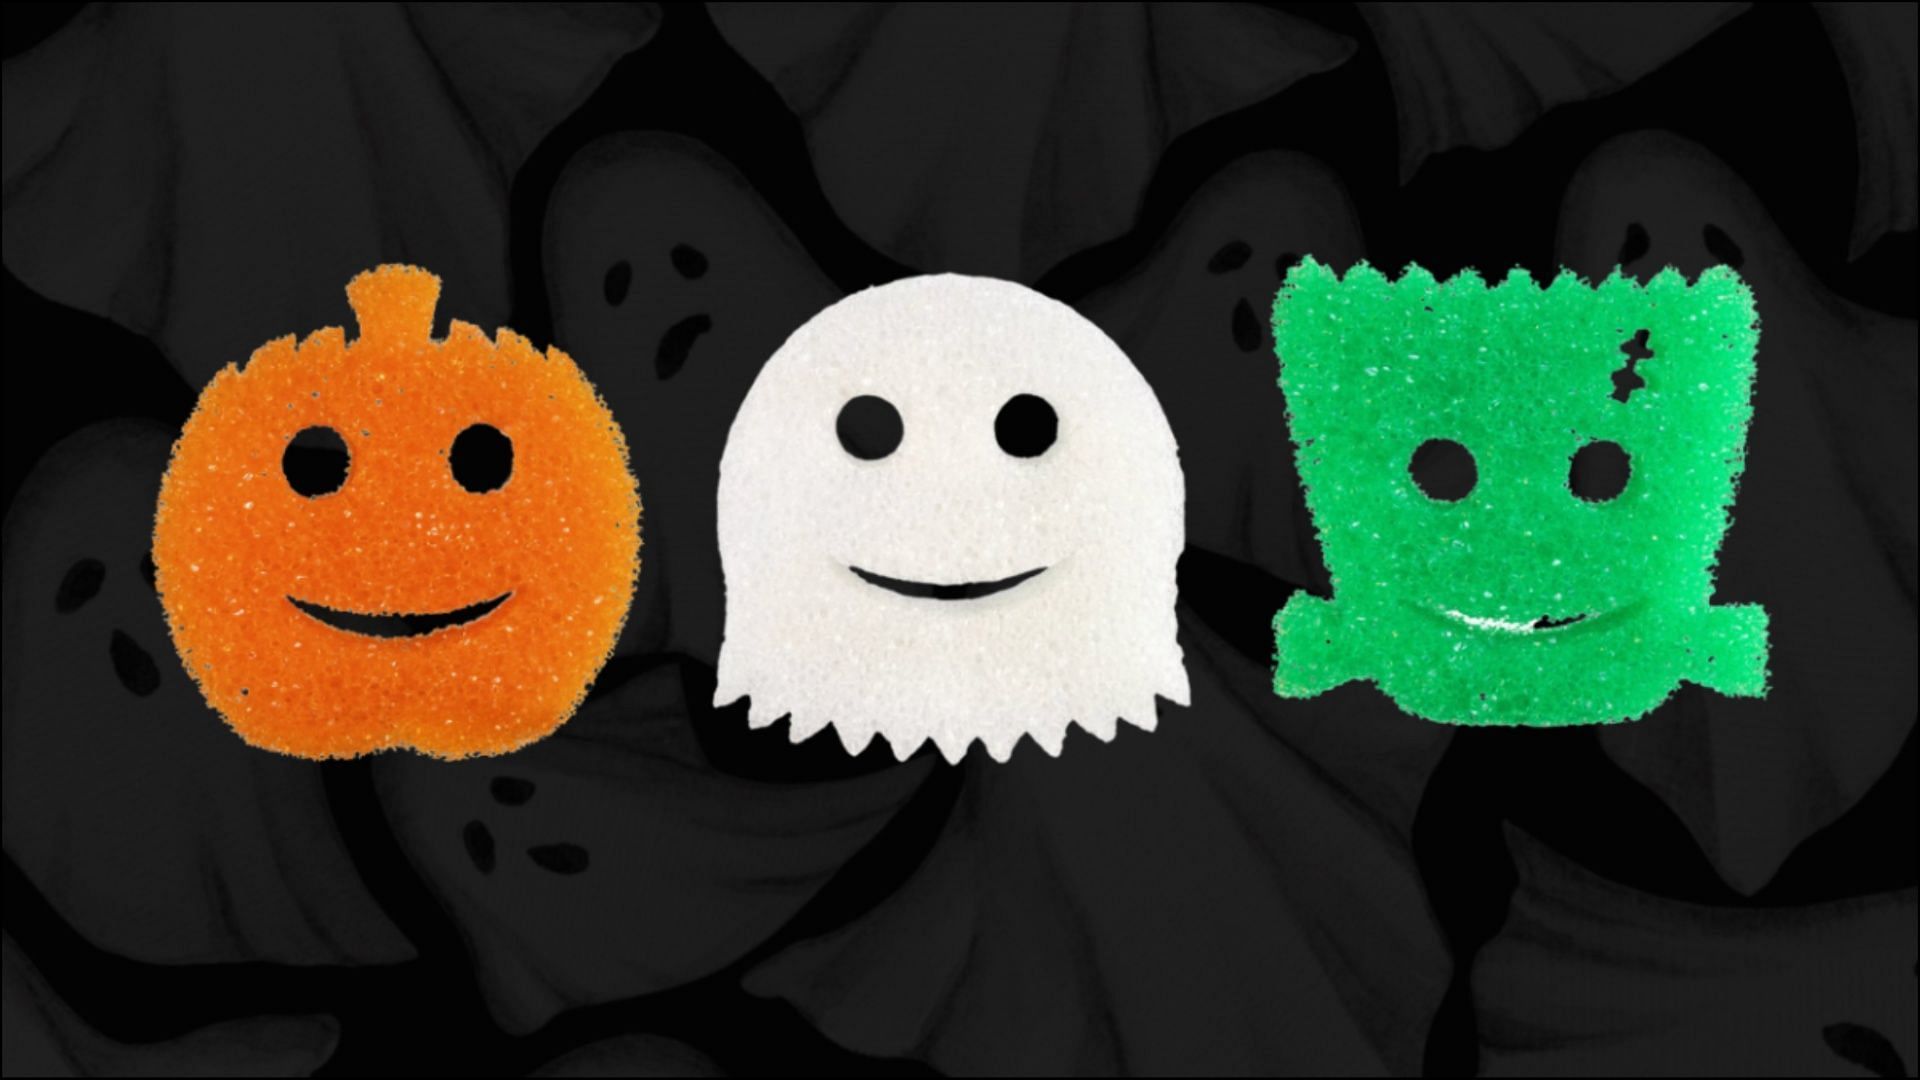 Scrub Daddy Sponges can be found in three different character designs for over $4.48 each (Image via Walmart)